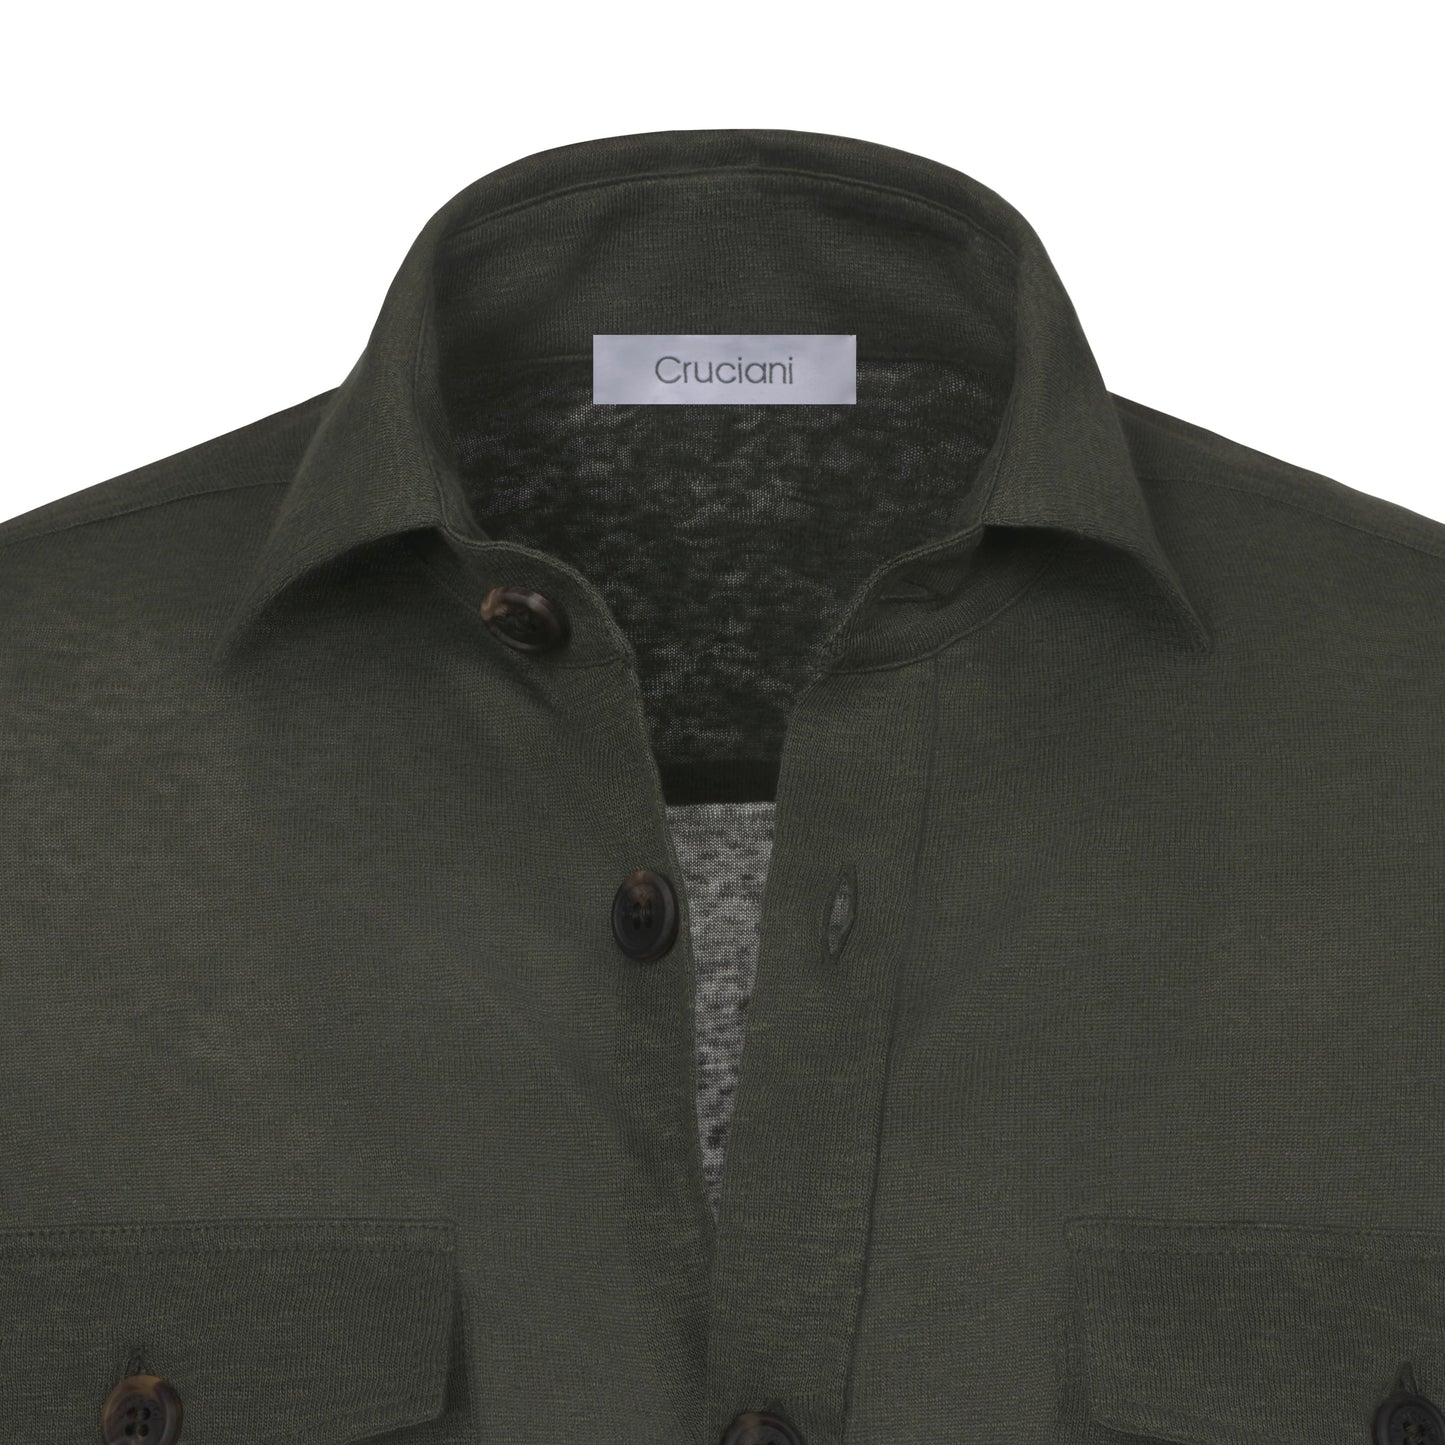 Cruciani Cotton Shirt with Patch Pockets in Green Melange - SARTALE